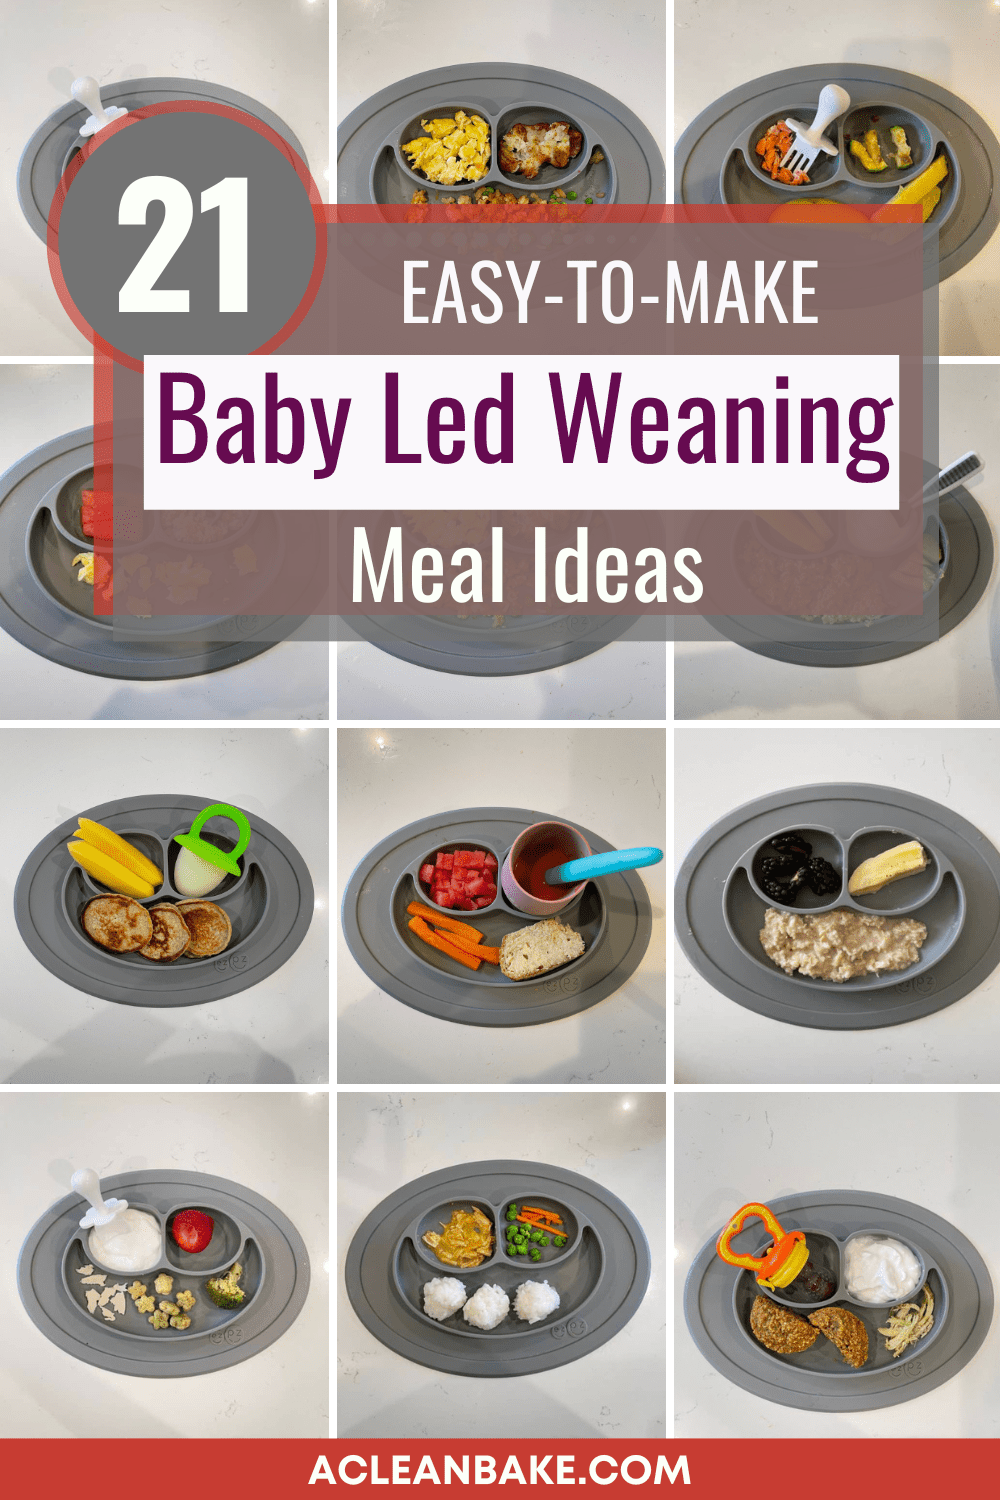 Grid of 12 photos of baby led weaning meal ideas with text overlay: 